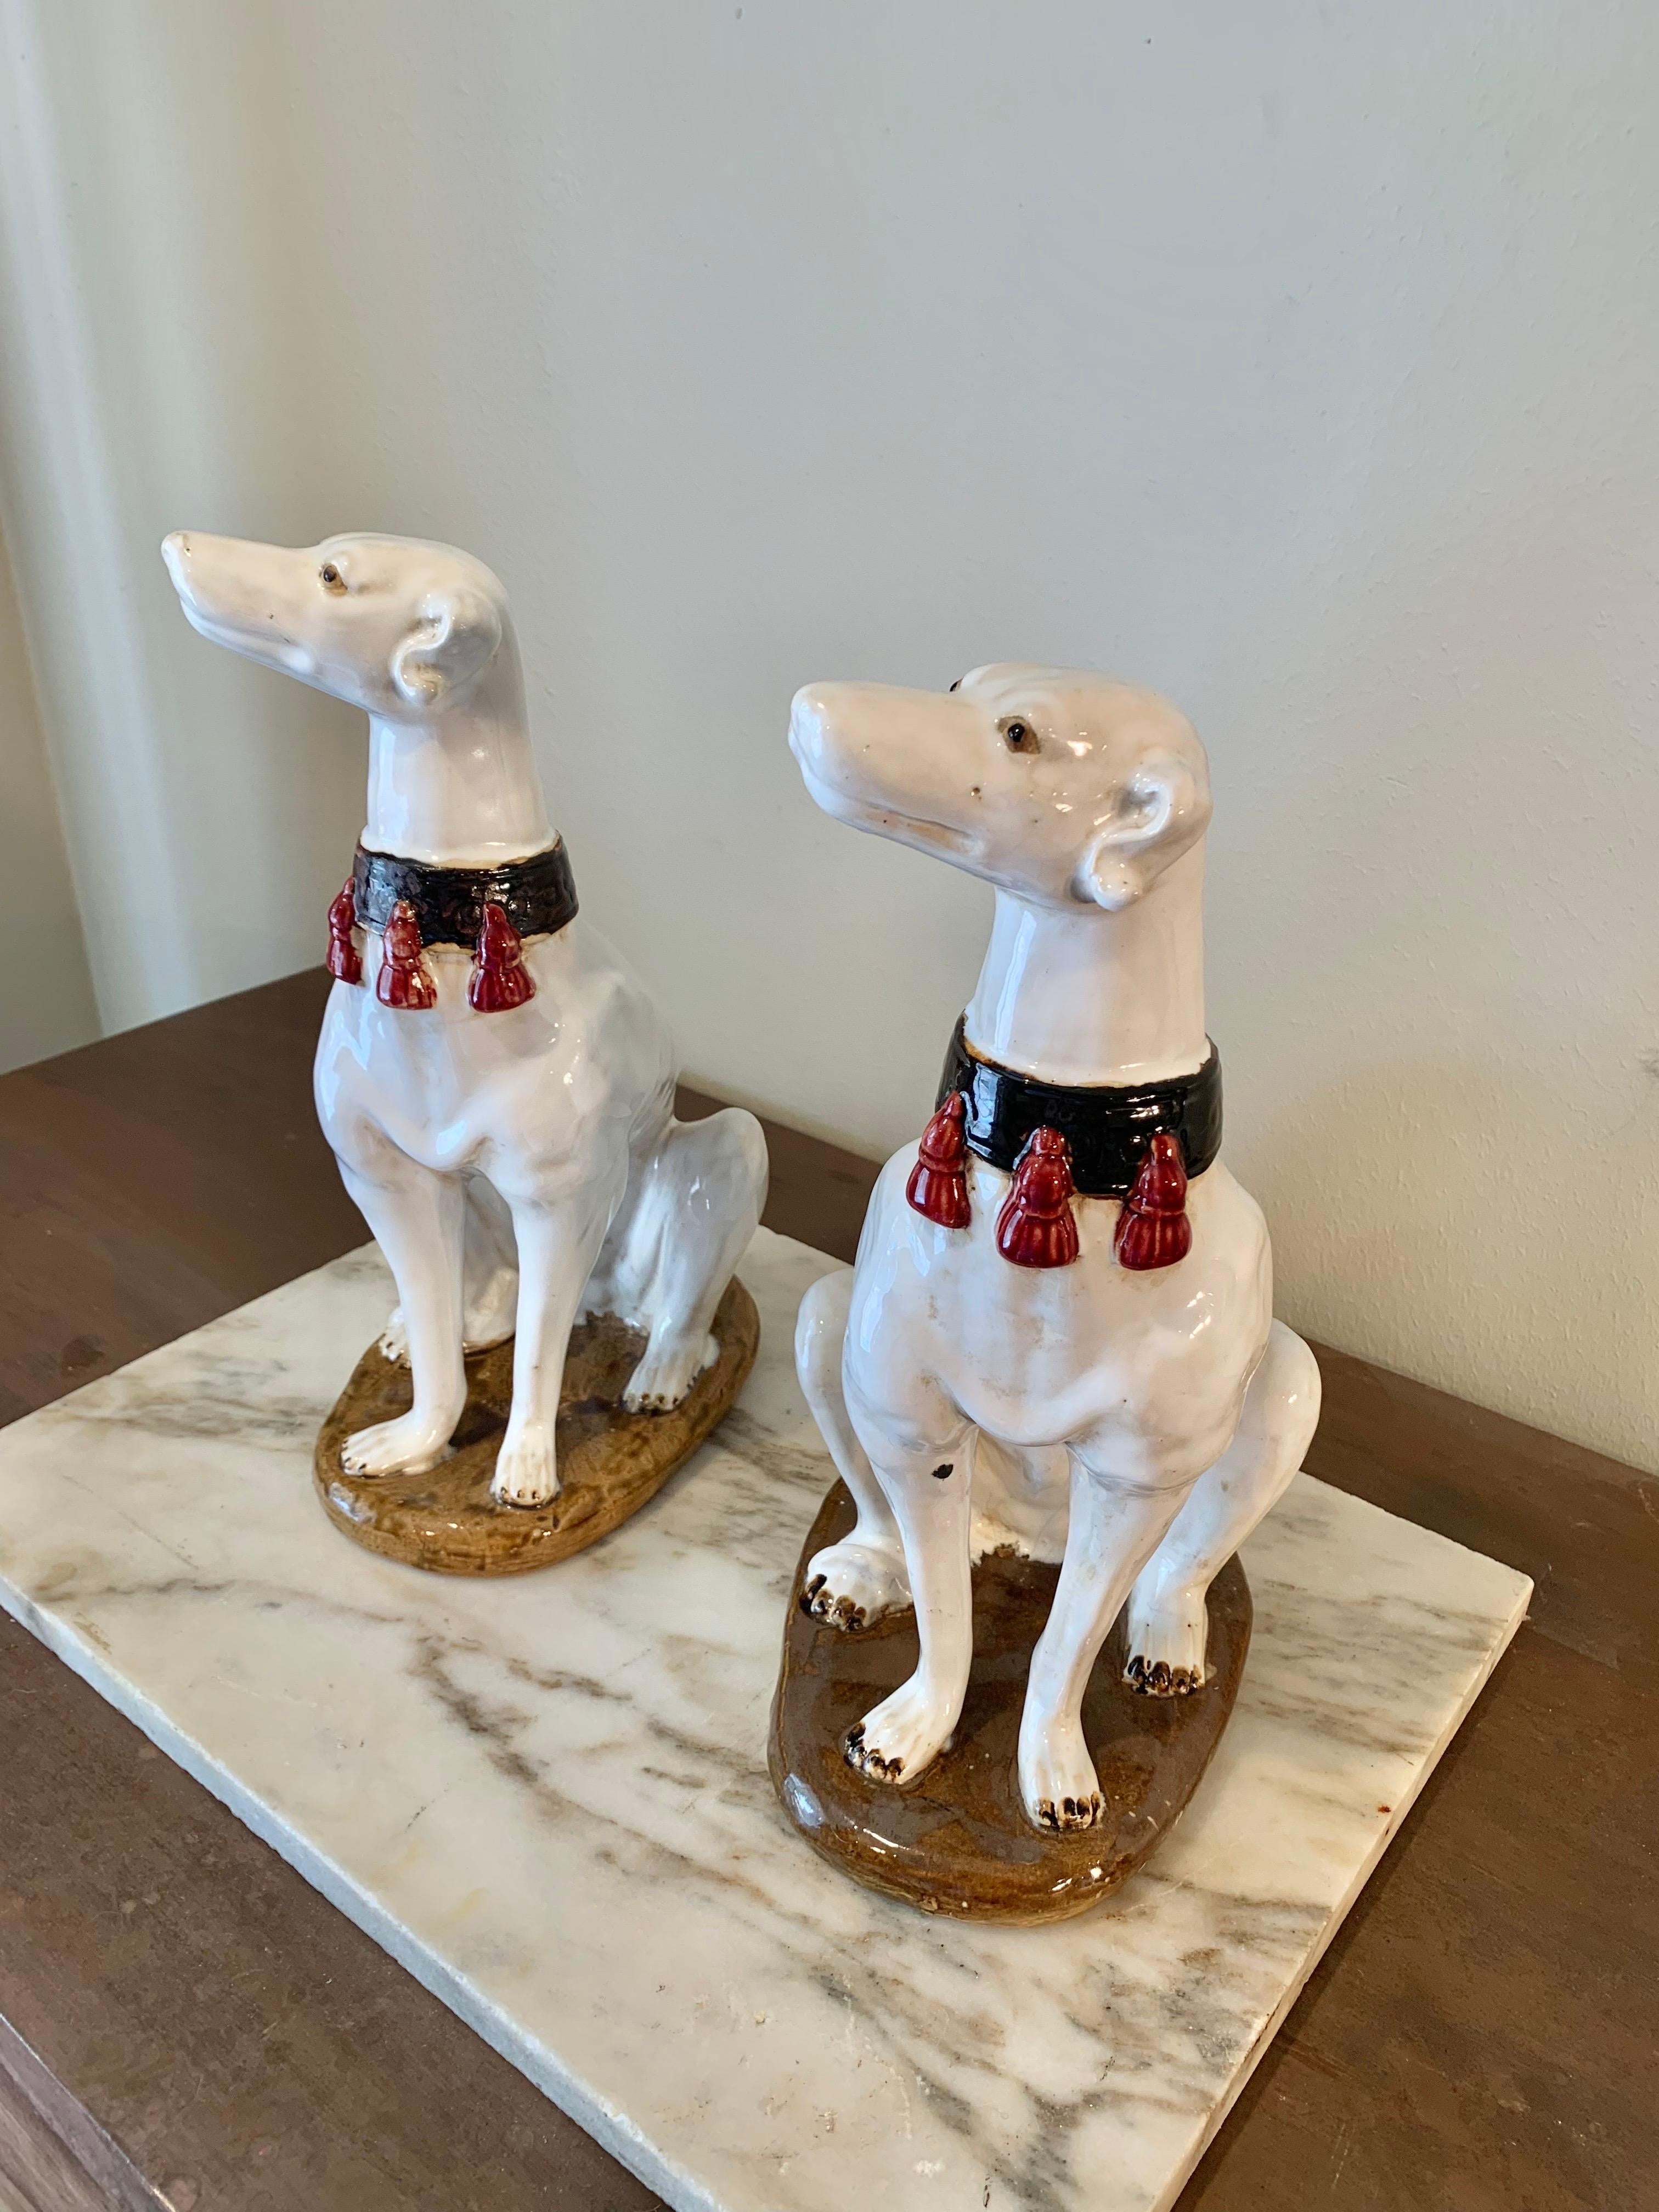 Hollywood Regency Mid 20th Century Italian Ceramic Whippet Sculptures - a Pair For Sale